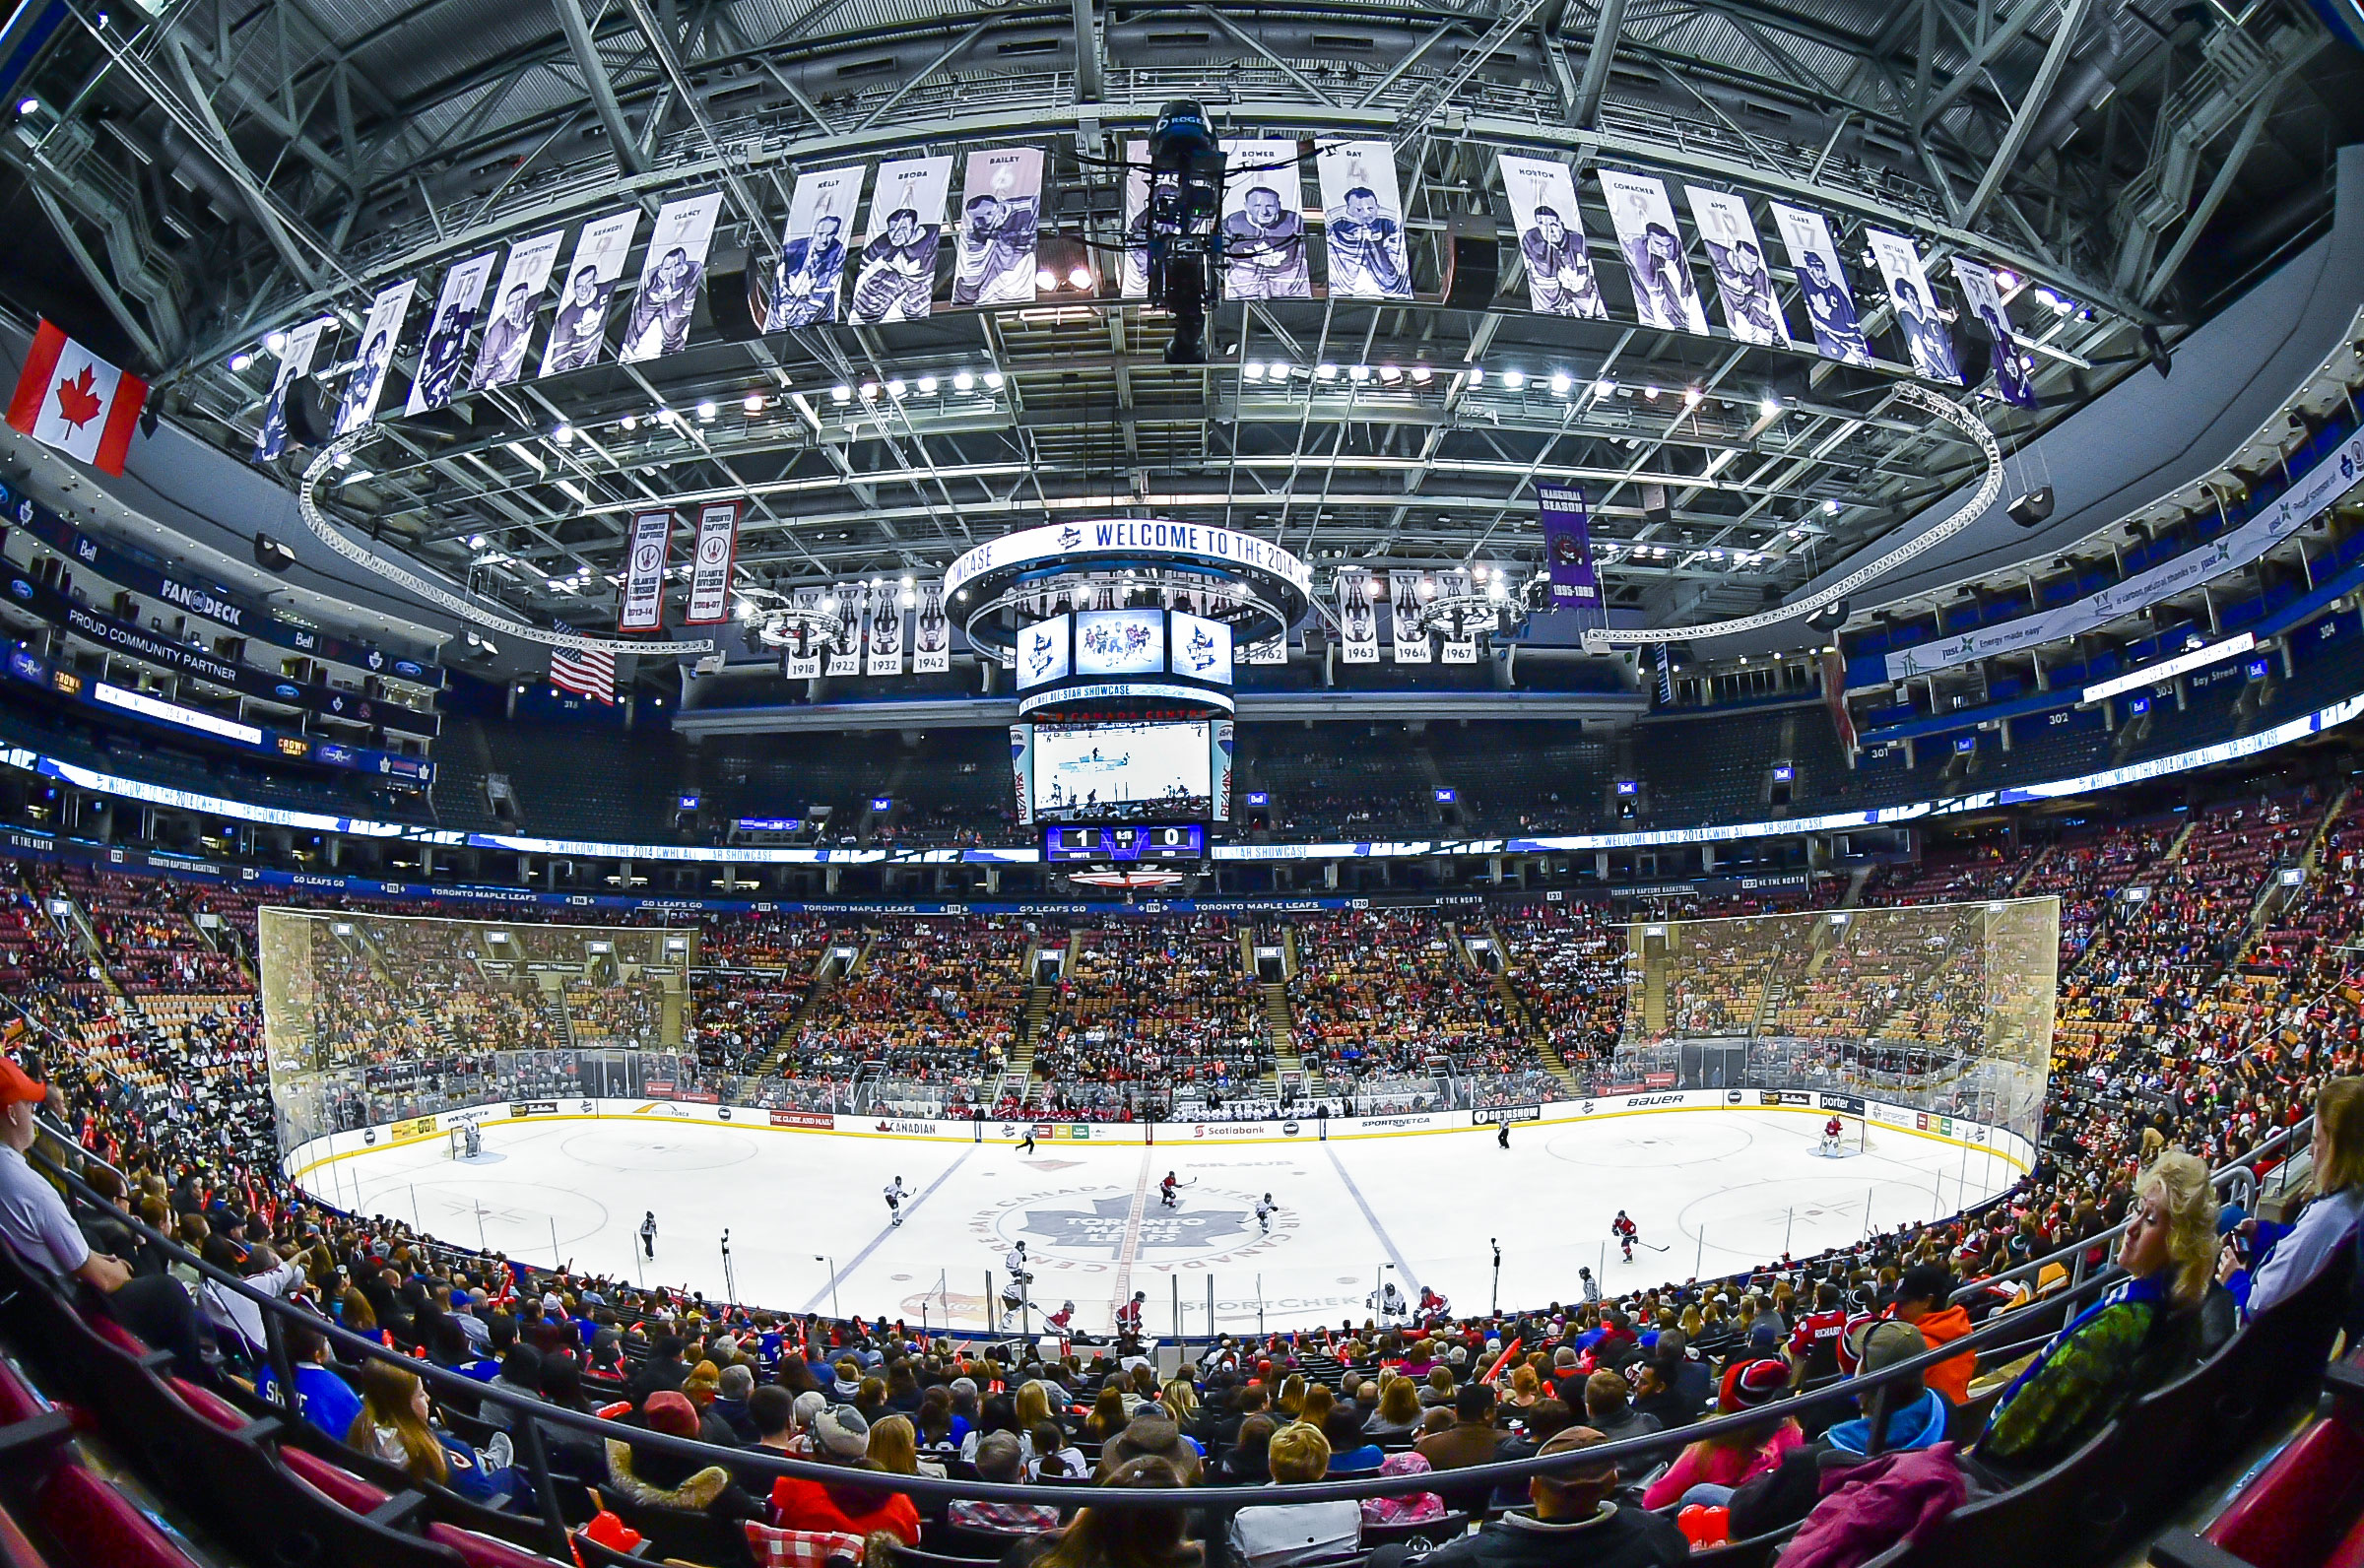 CWHL All-Star Game 2016 panoramic view, Air Canada Centre, Toronto